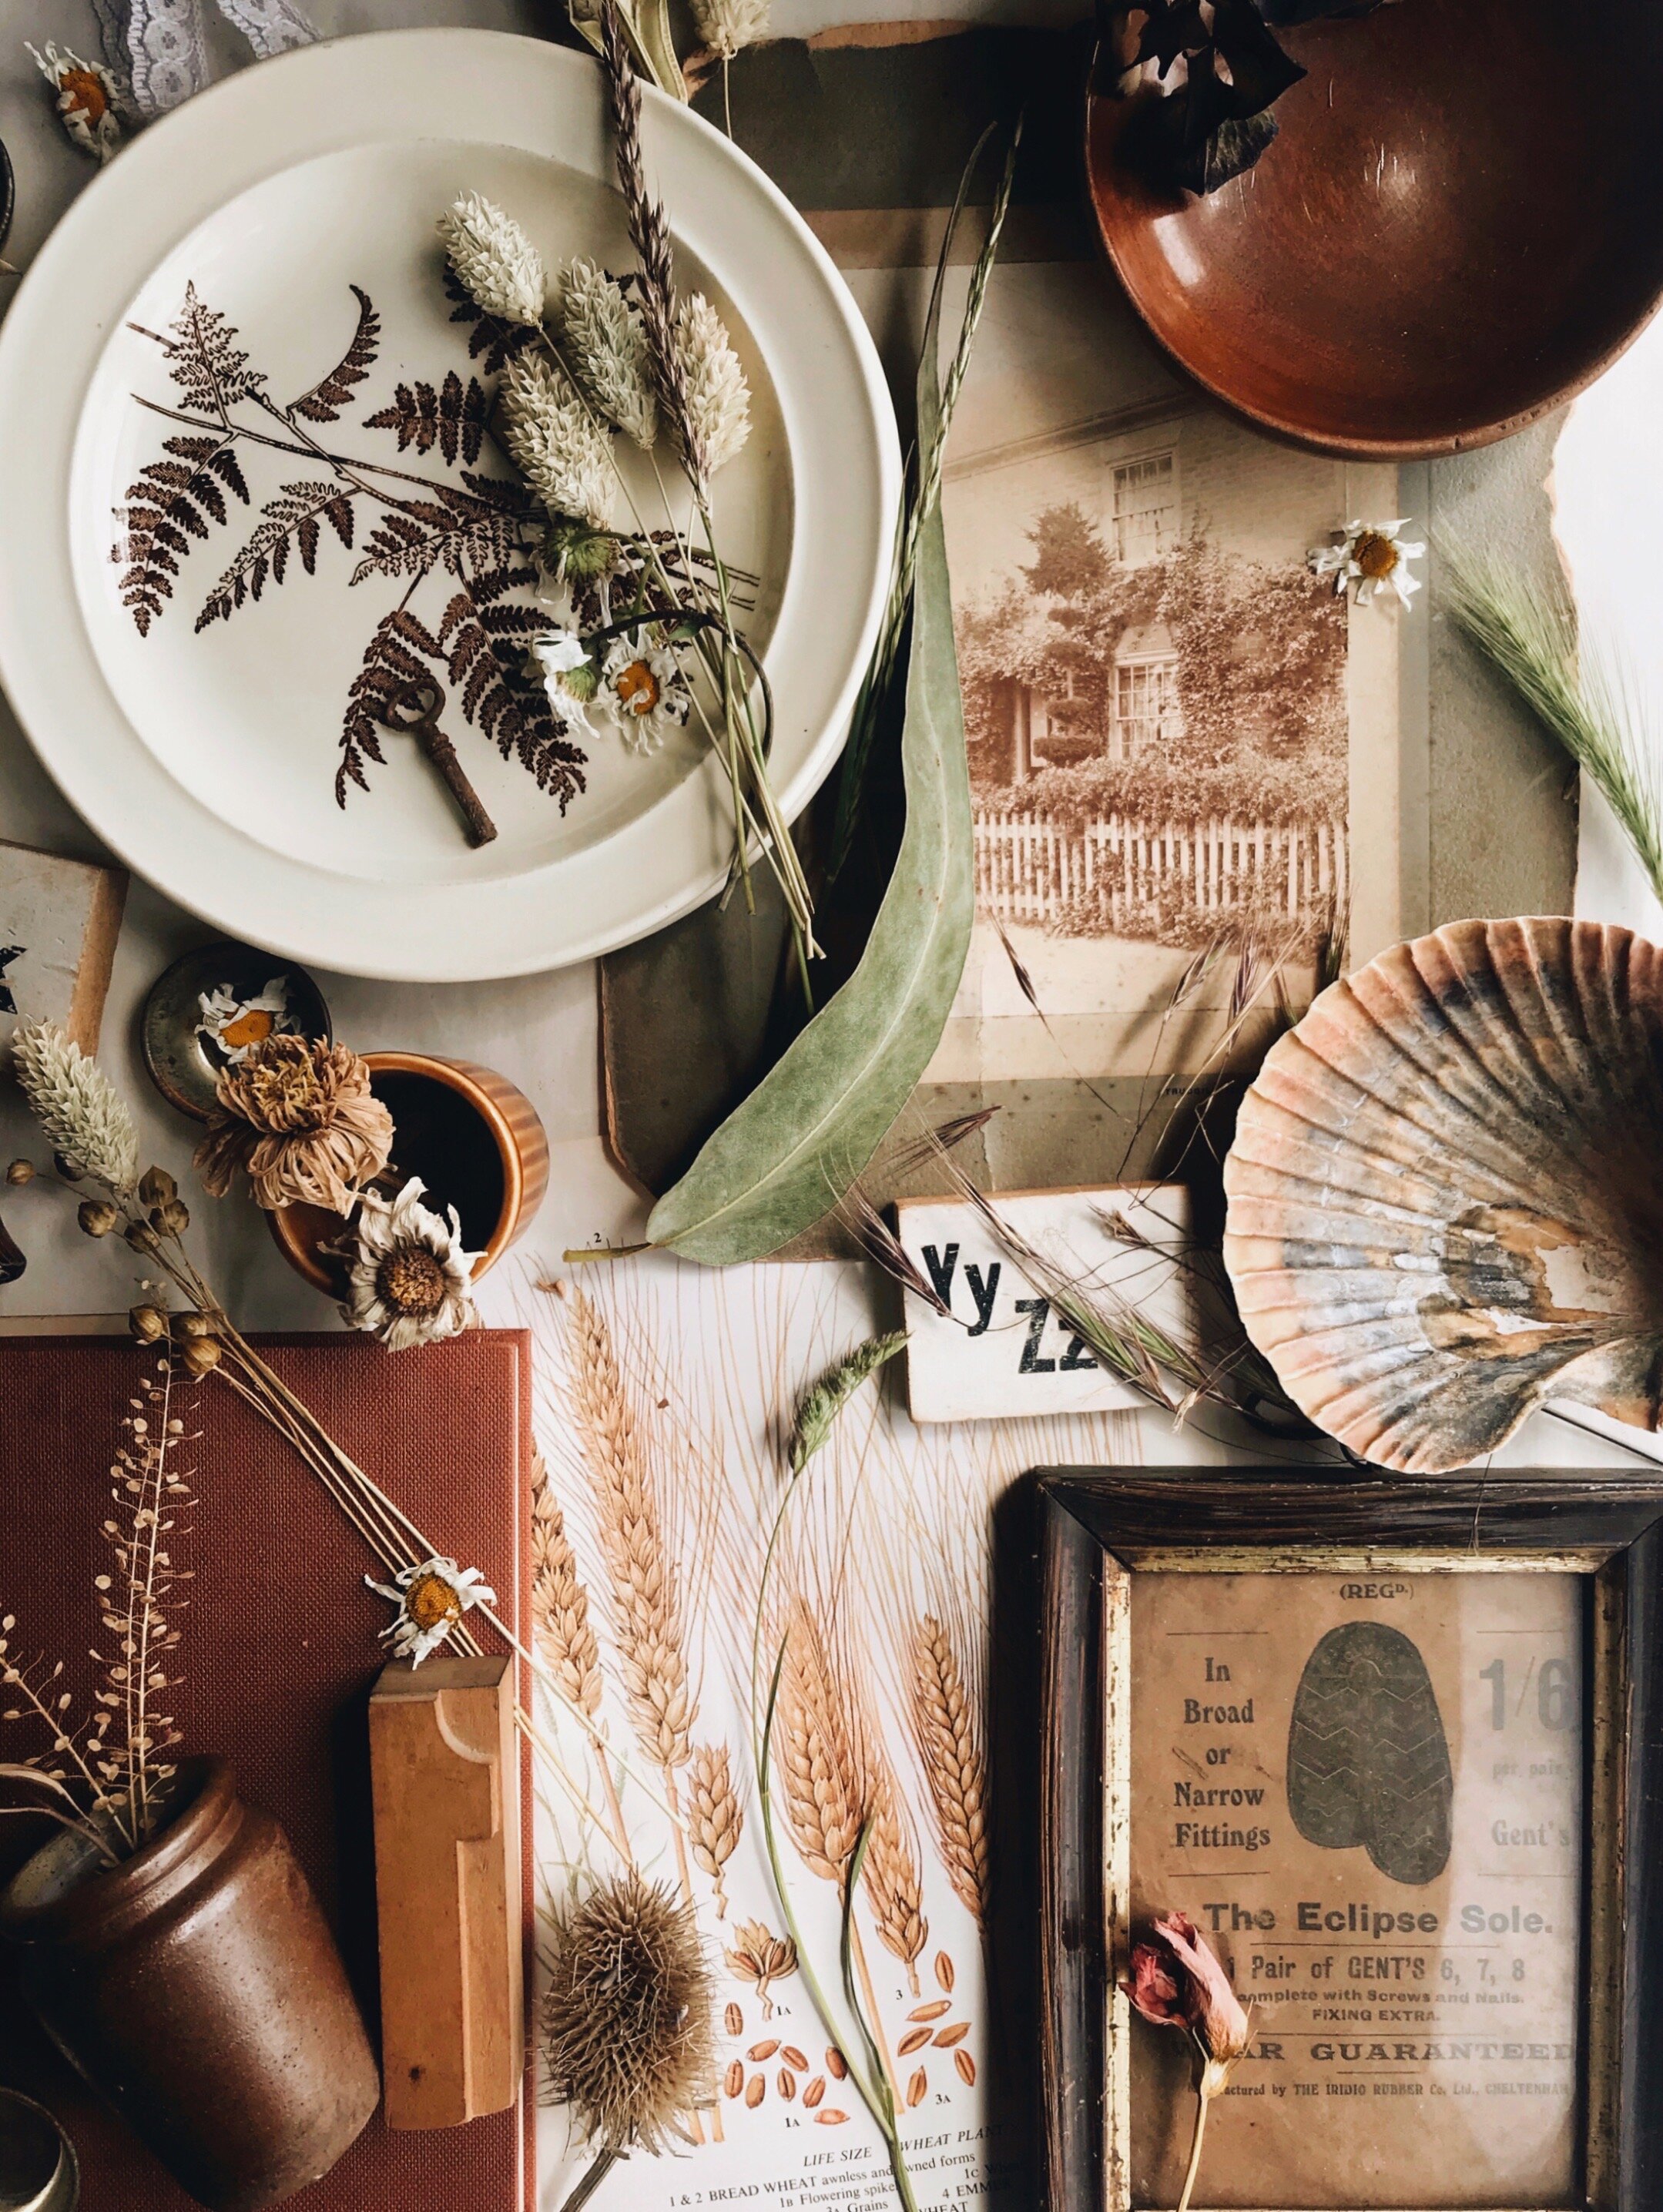 15 great online stores for vintage homeware and furniture